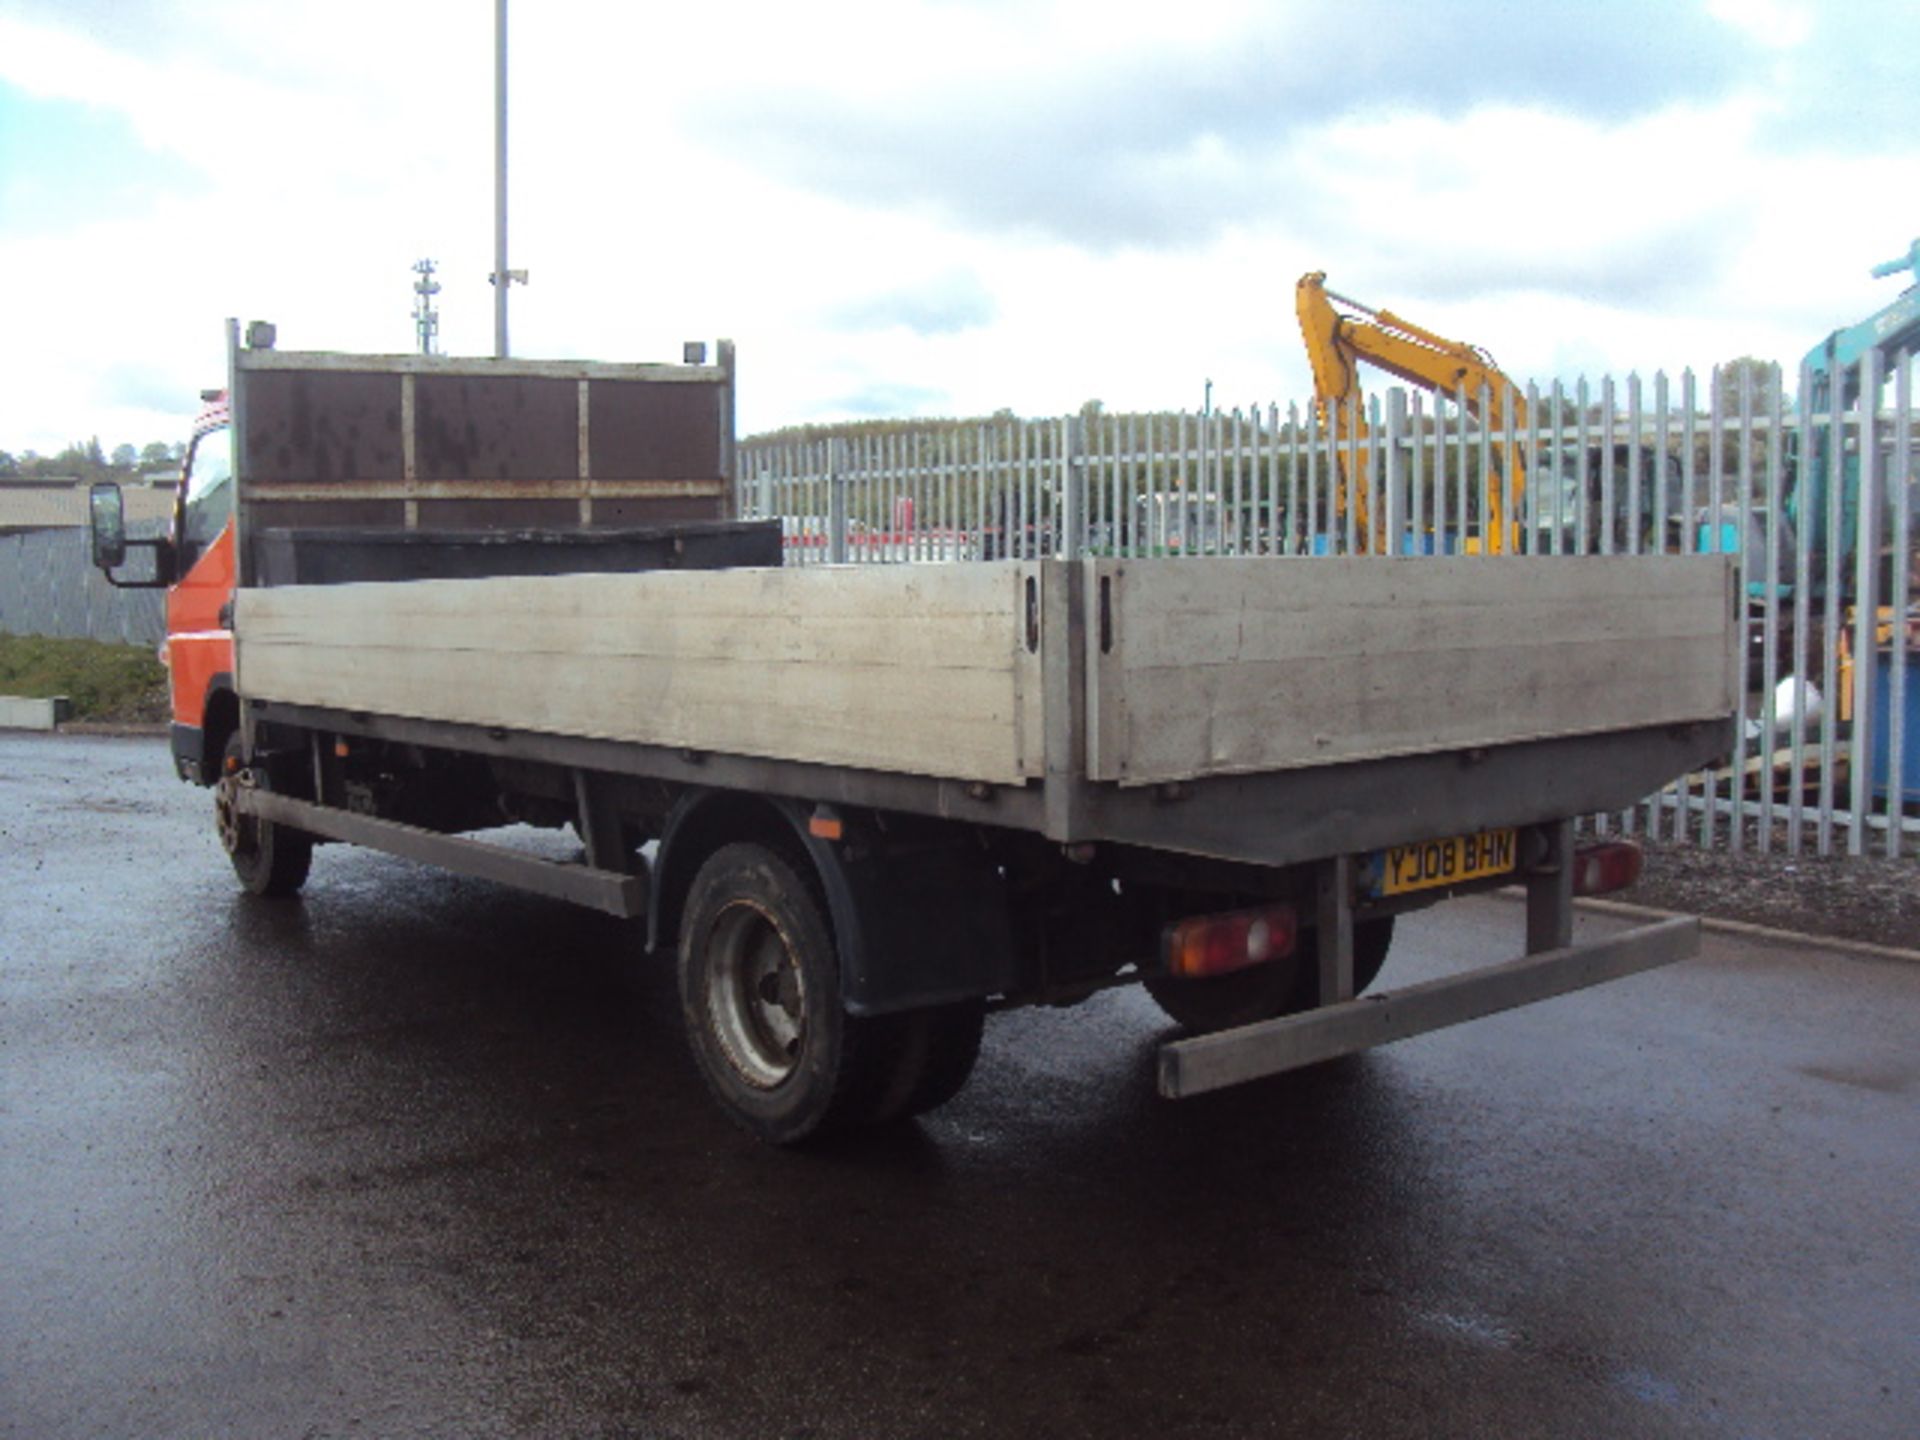 2008 MITSUBISHI FUSO Canter 8C18 7.5t drop side truck Reg: YJ08 BHN( 147,000 recorded miles)(R+D) - Image 3 of 7